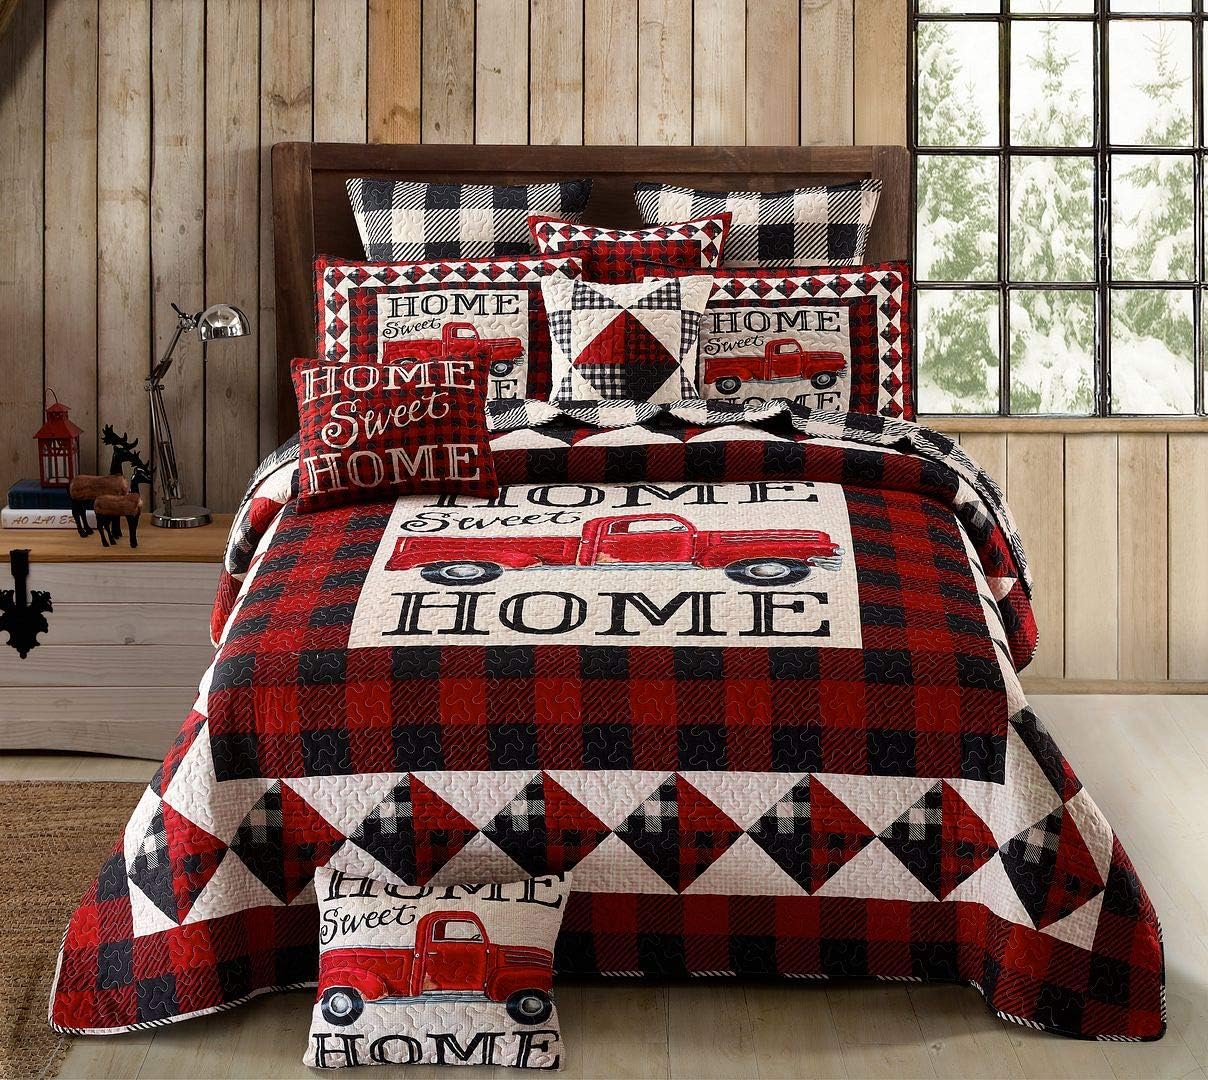 Virah Bella 3 Piece Queen Cabin Quilt Bedding Set - Strain Red Truck Home Sweet Home - Rustic Wildlife Country Reversible Camping Comforter with Decorative Pillow Shams, Red/White